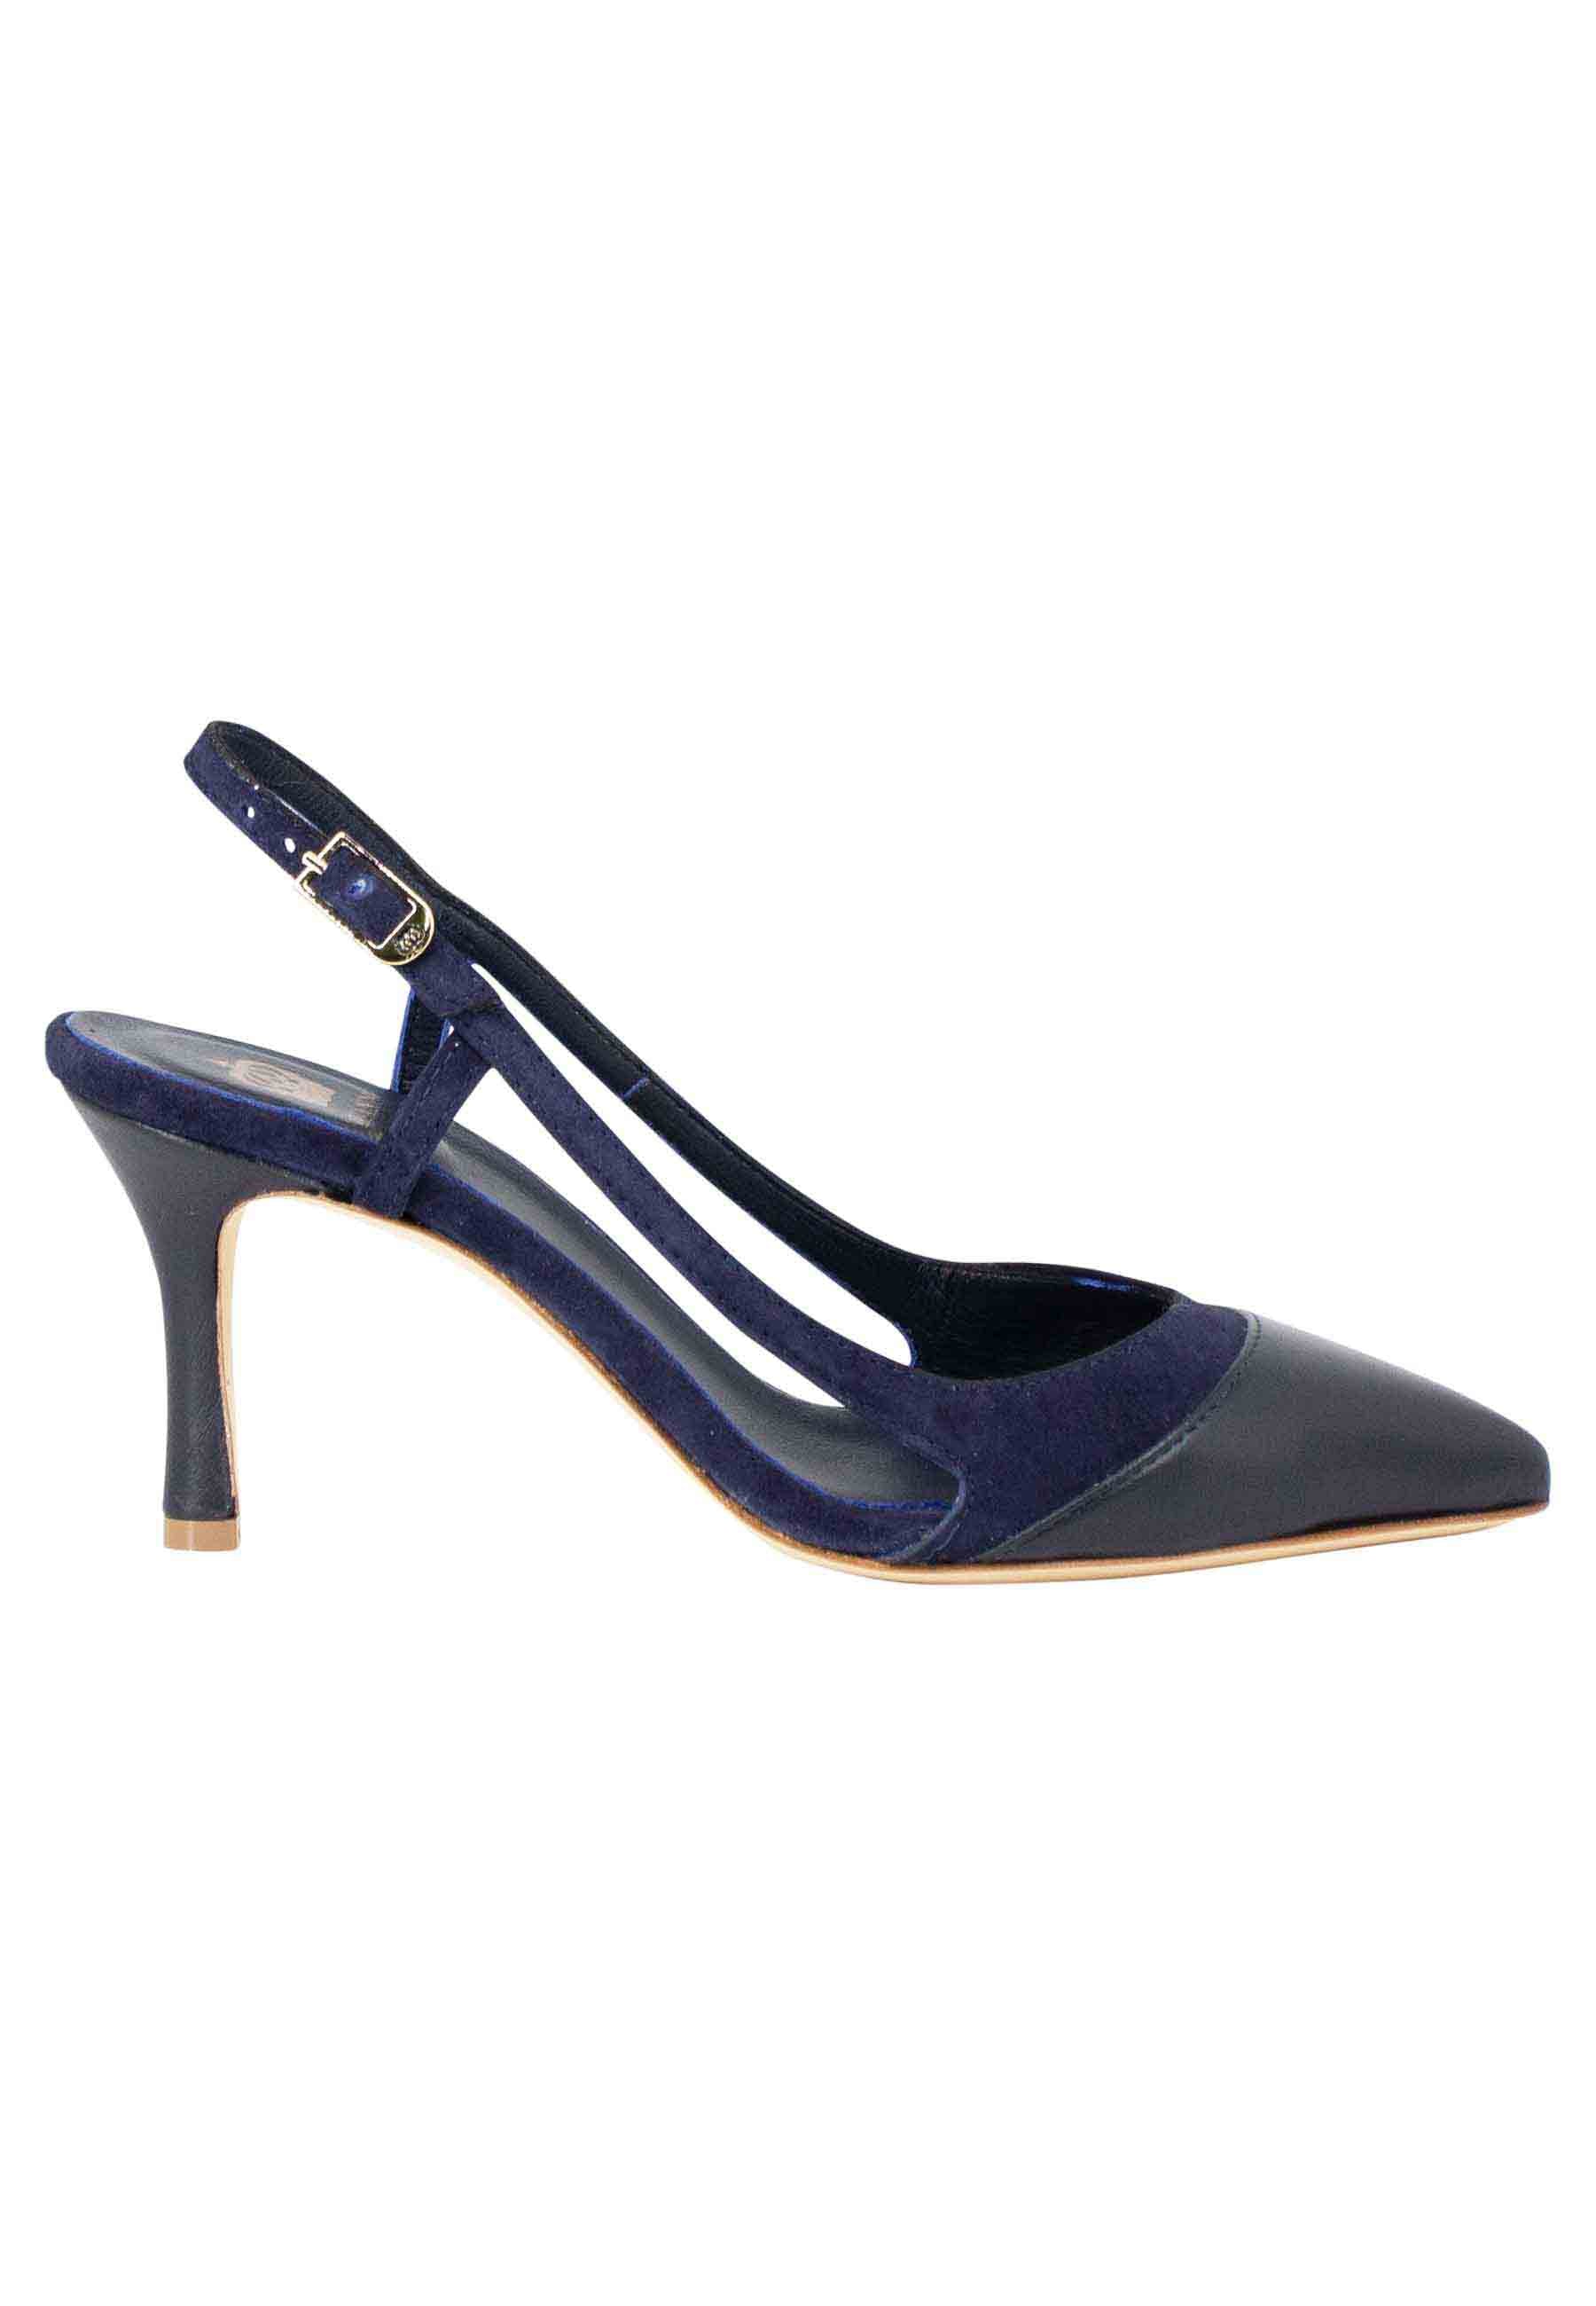 Women's slingback pumps in blue leather and suede with high heel